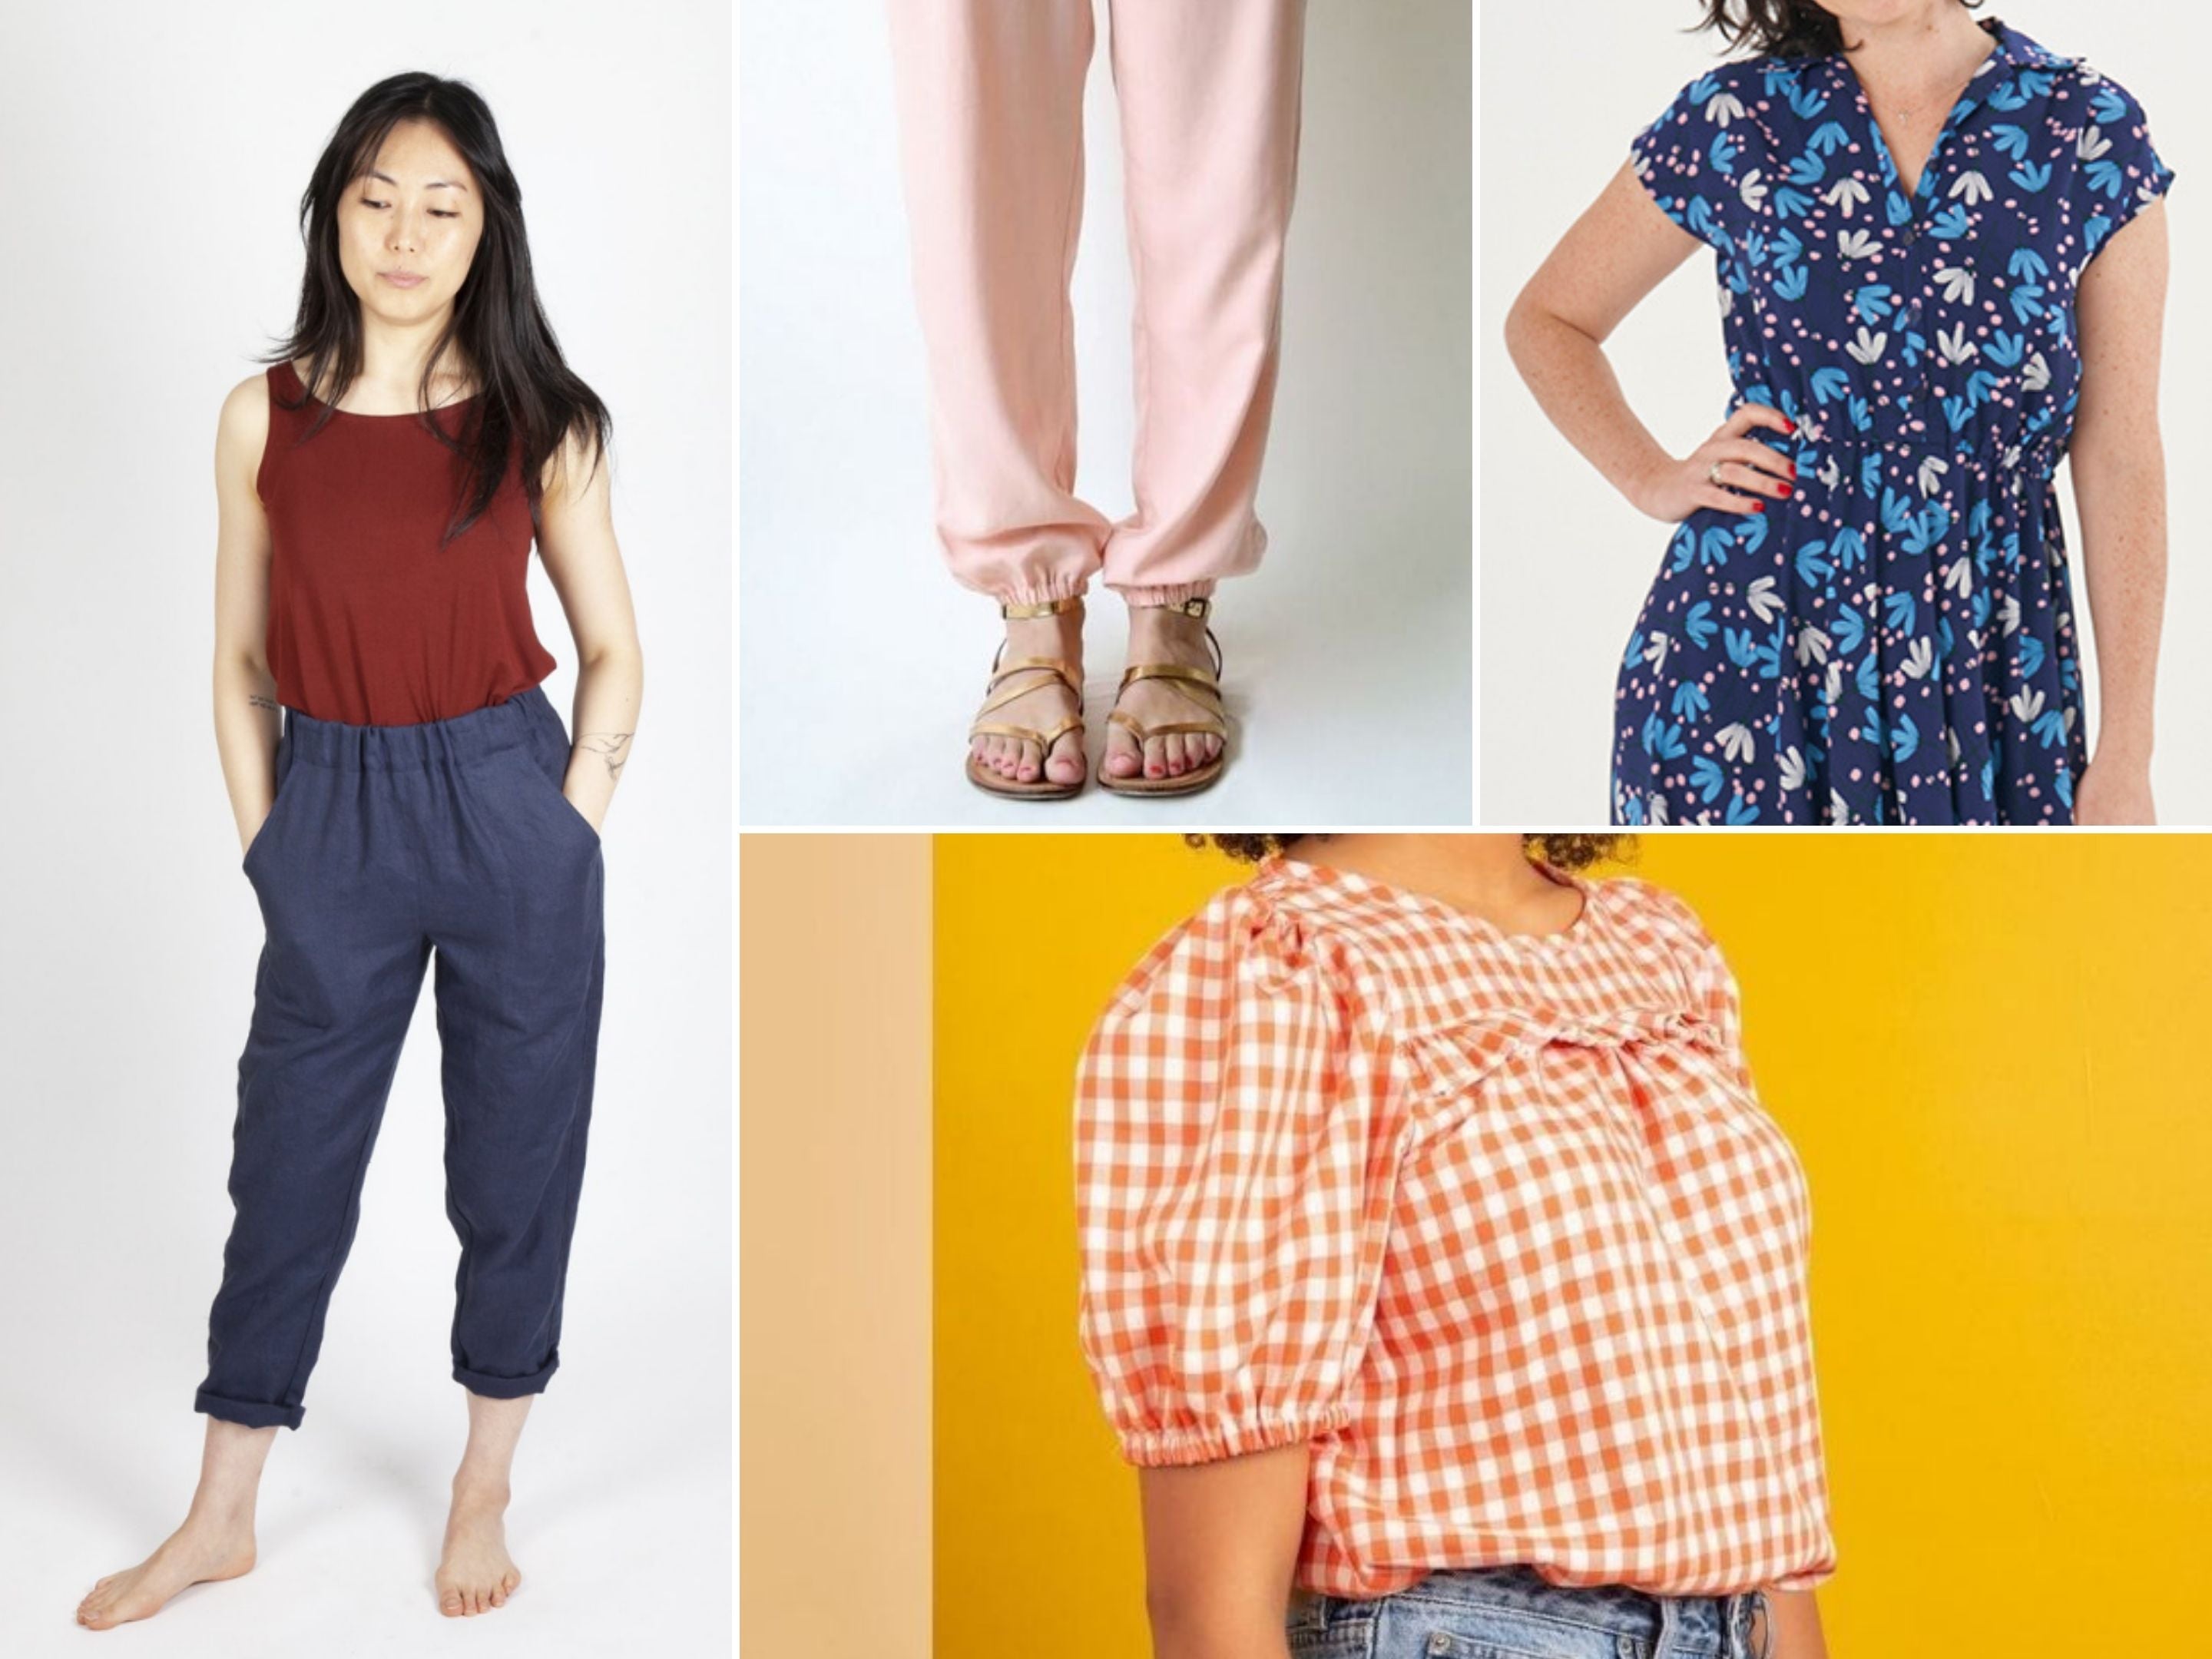 Various ways to use elastic in handmade garments—suggested patterns Sew House Seven Free Range Slacks, Made by Rae Luna Pants, Sew Over It Penny Dress, and Friday Pattern Co. Sagebrush Top